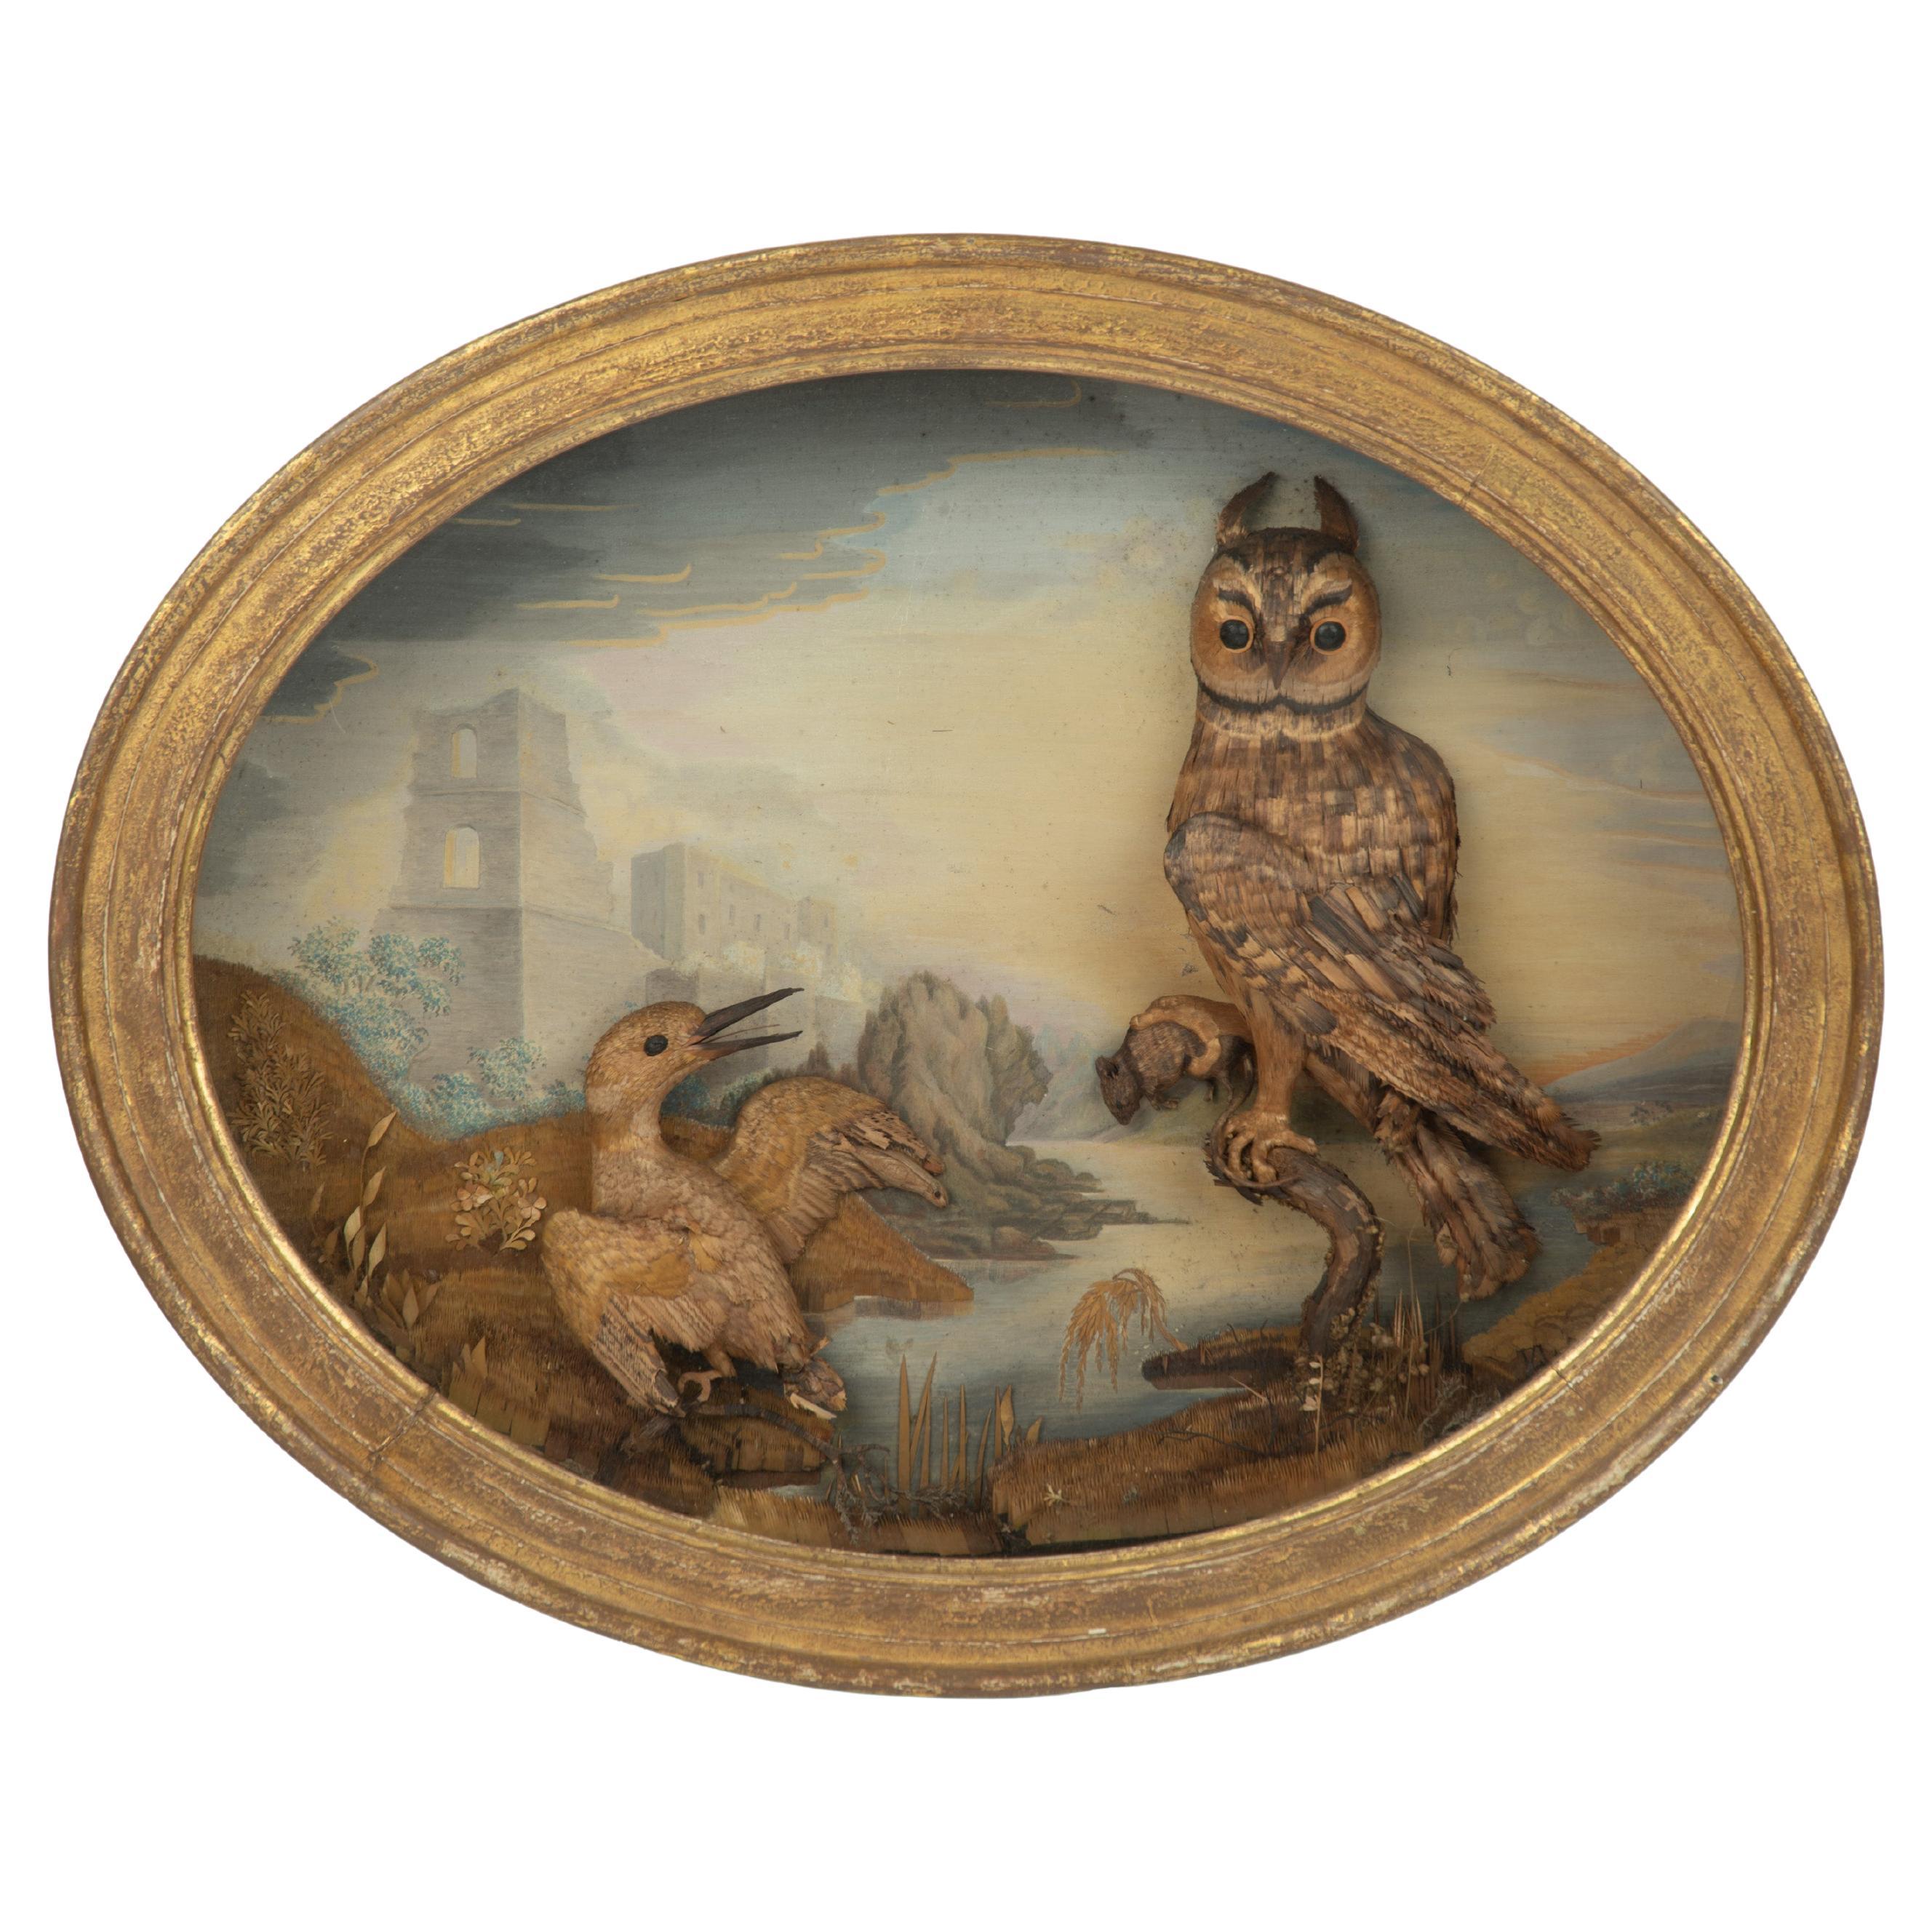 An exceptional straw work diorama of an owl and kingfisher - Leverian Museum